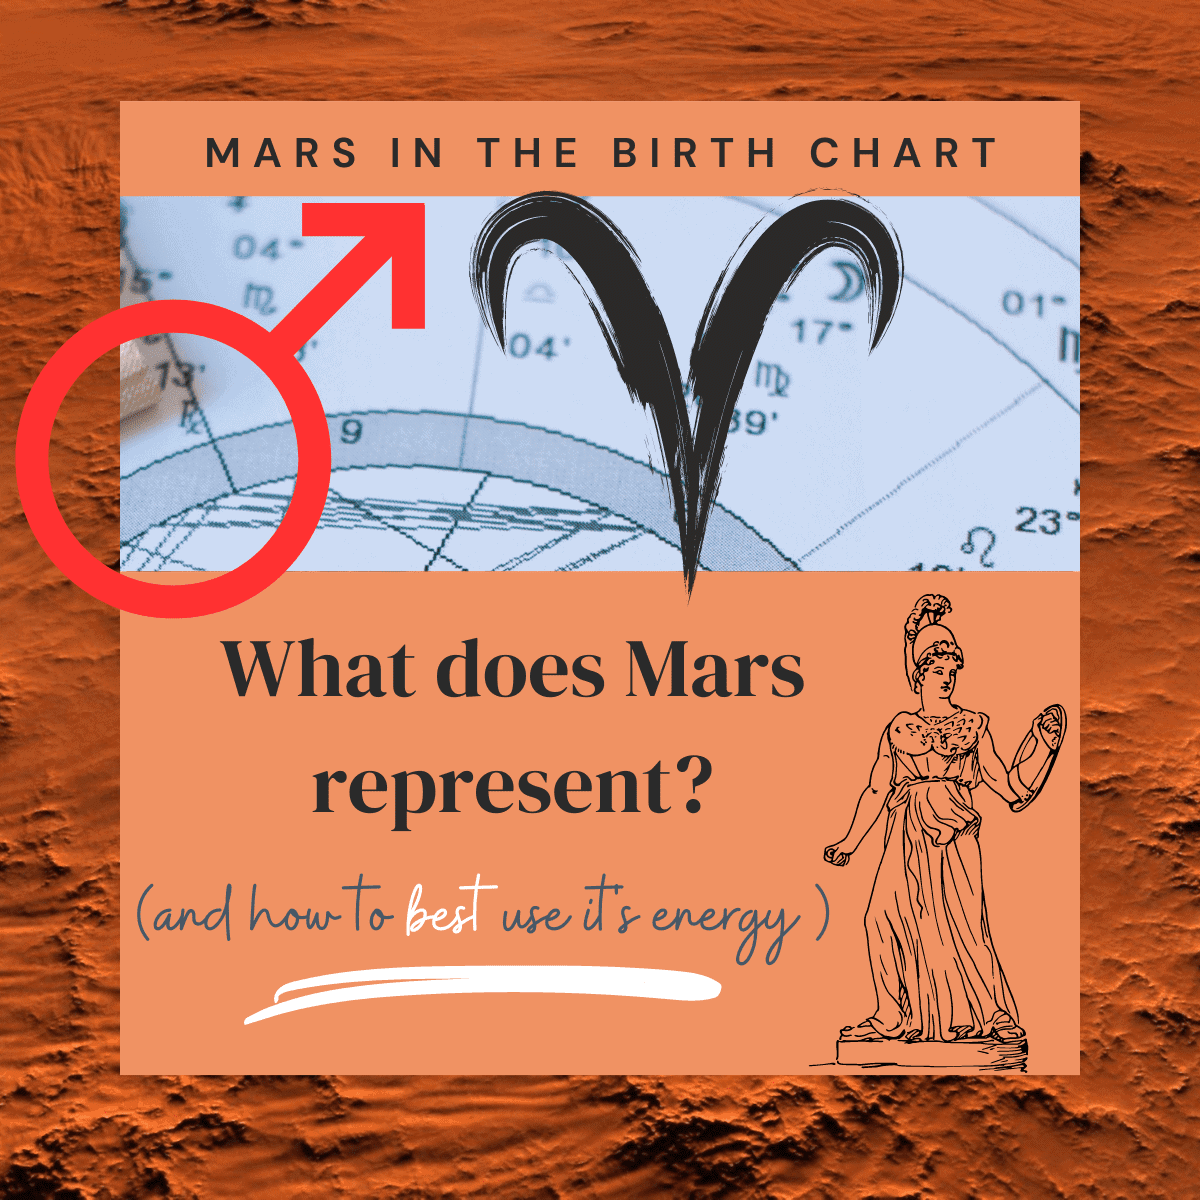 Background image is of the red surface of the planet Mars. Atop that is an image of an astrology birth chart, the glyph for Mars, the zodiac sign symbol for Aries and a picture of the greek god Ares. Text reads "Mars in the birth chart, What does Mars represent, and how to best use it's energy"